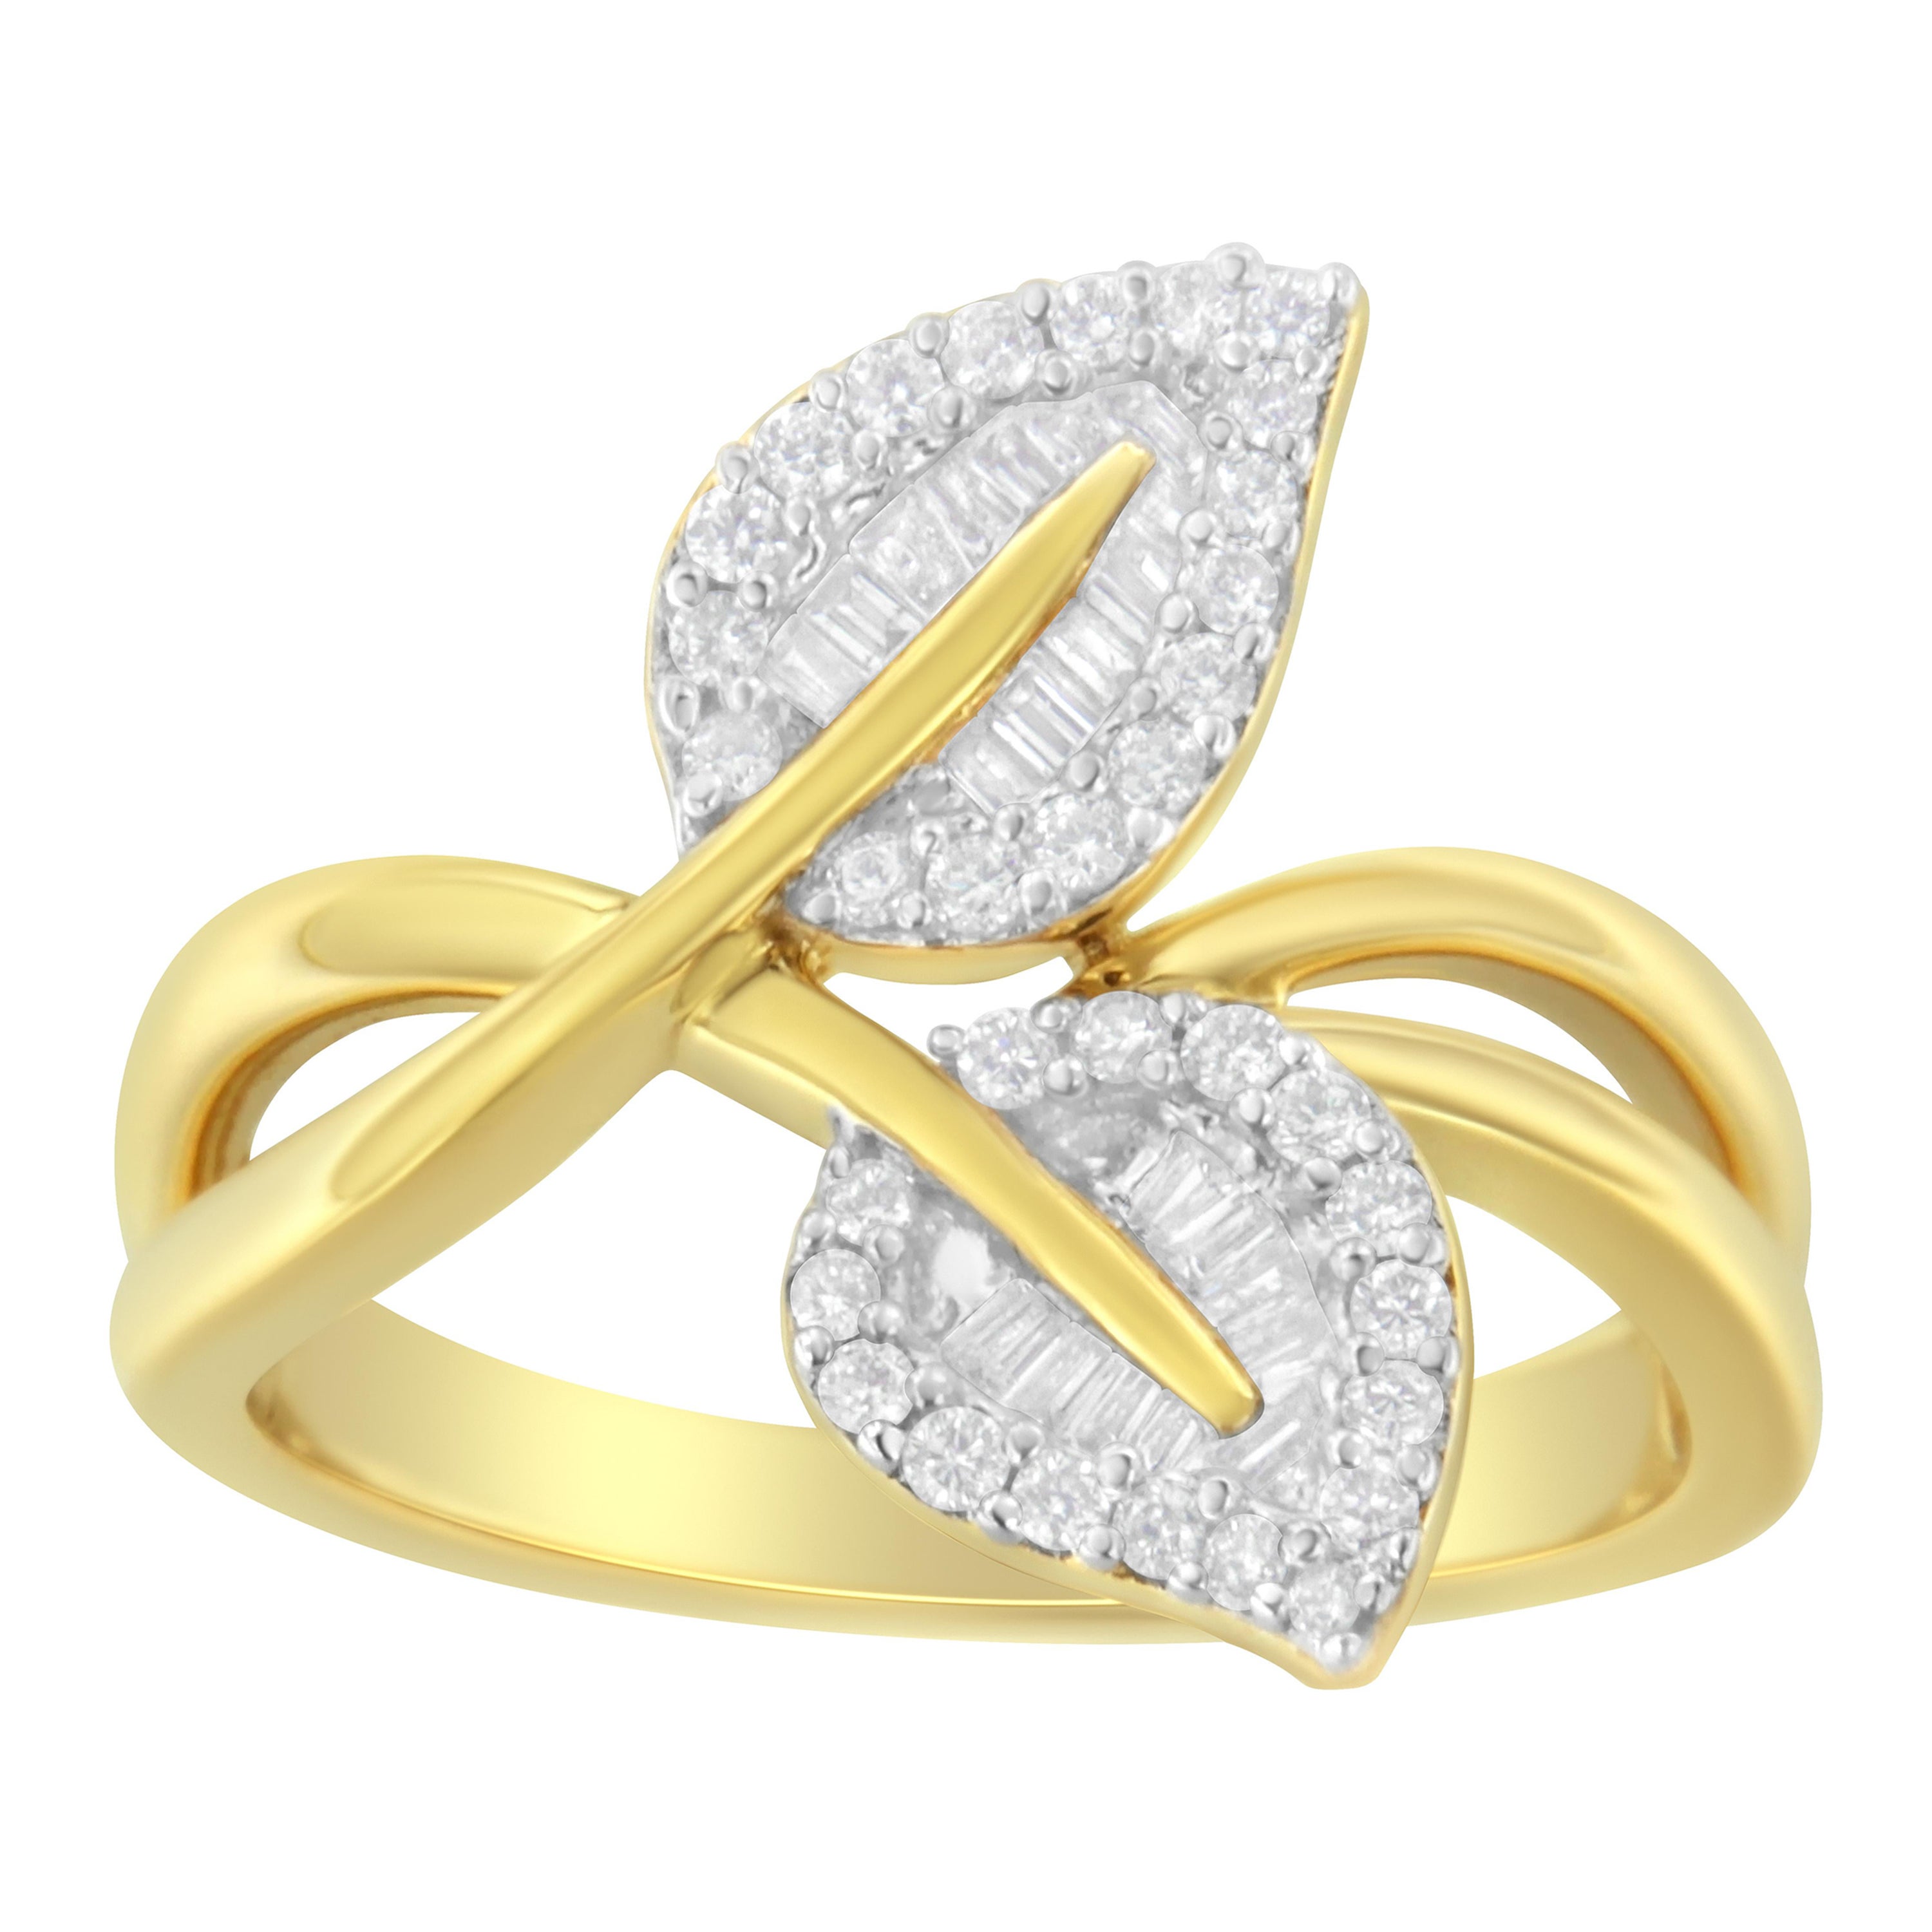 10K Yellow Gold 3/8 Carat Round and Baguette-Cut Diamond Leaf Cocktail Ring For Sale